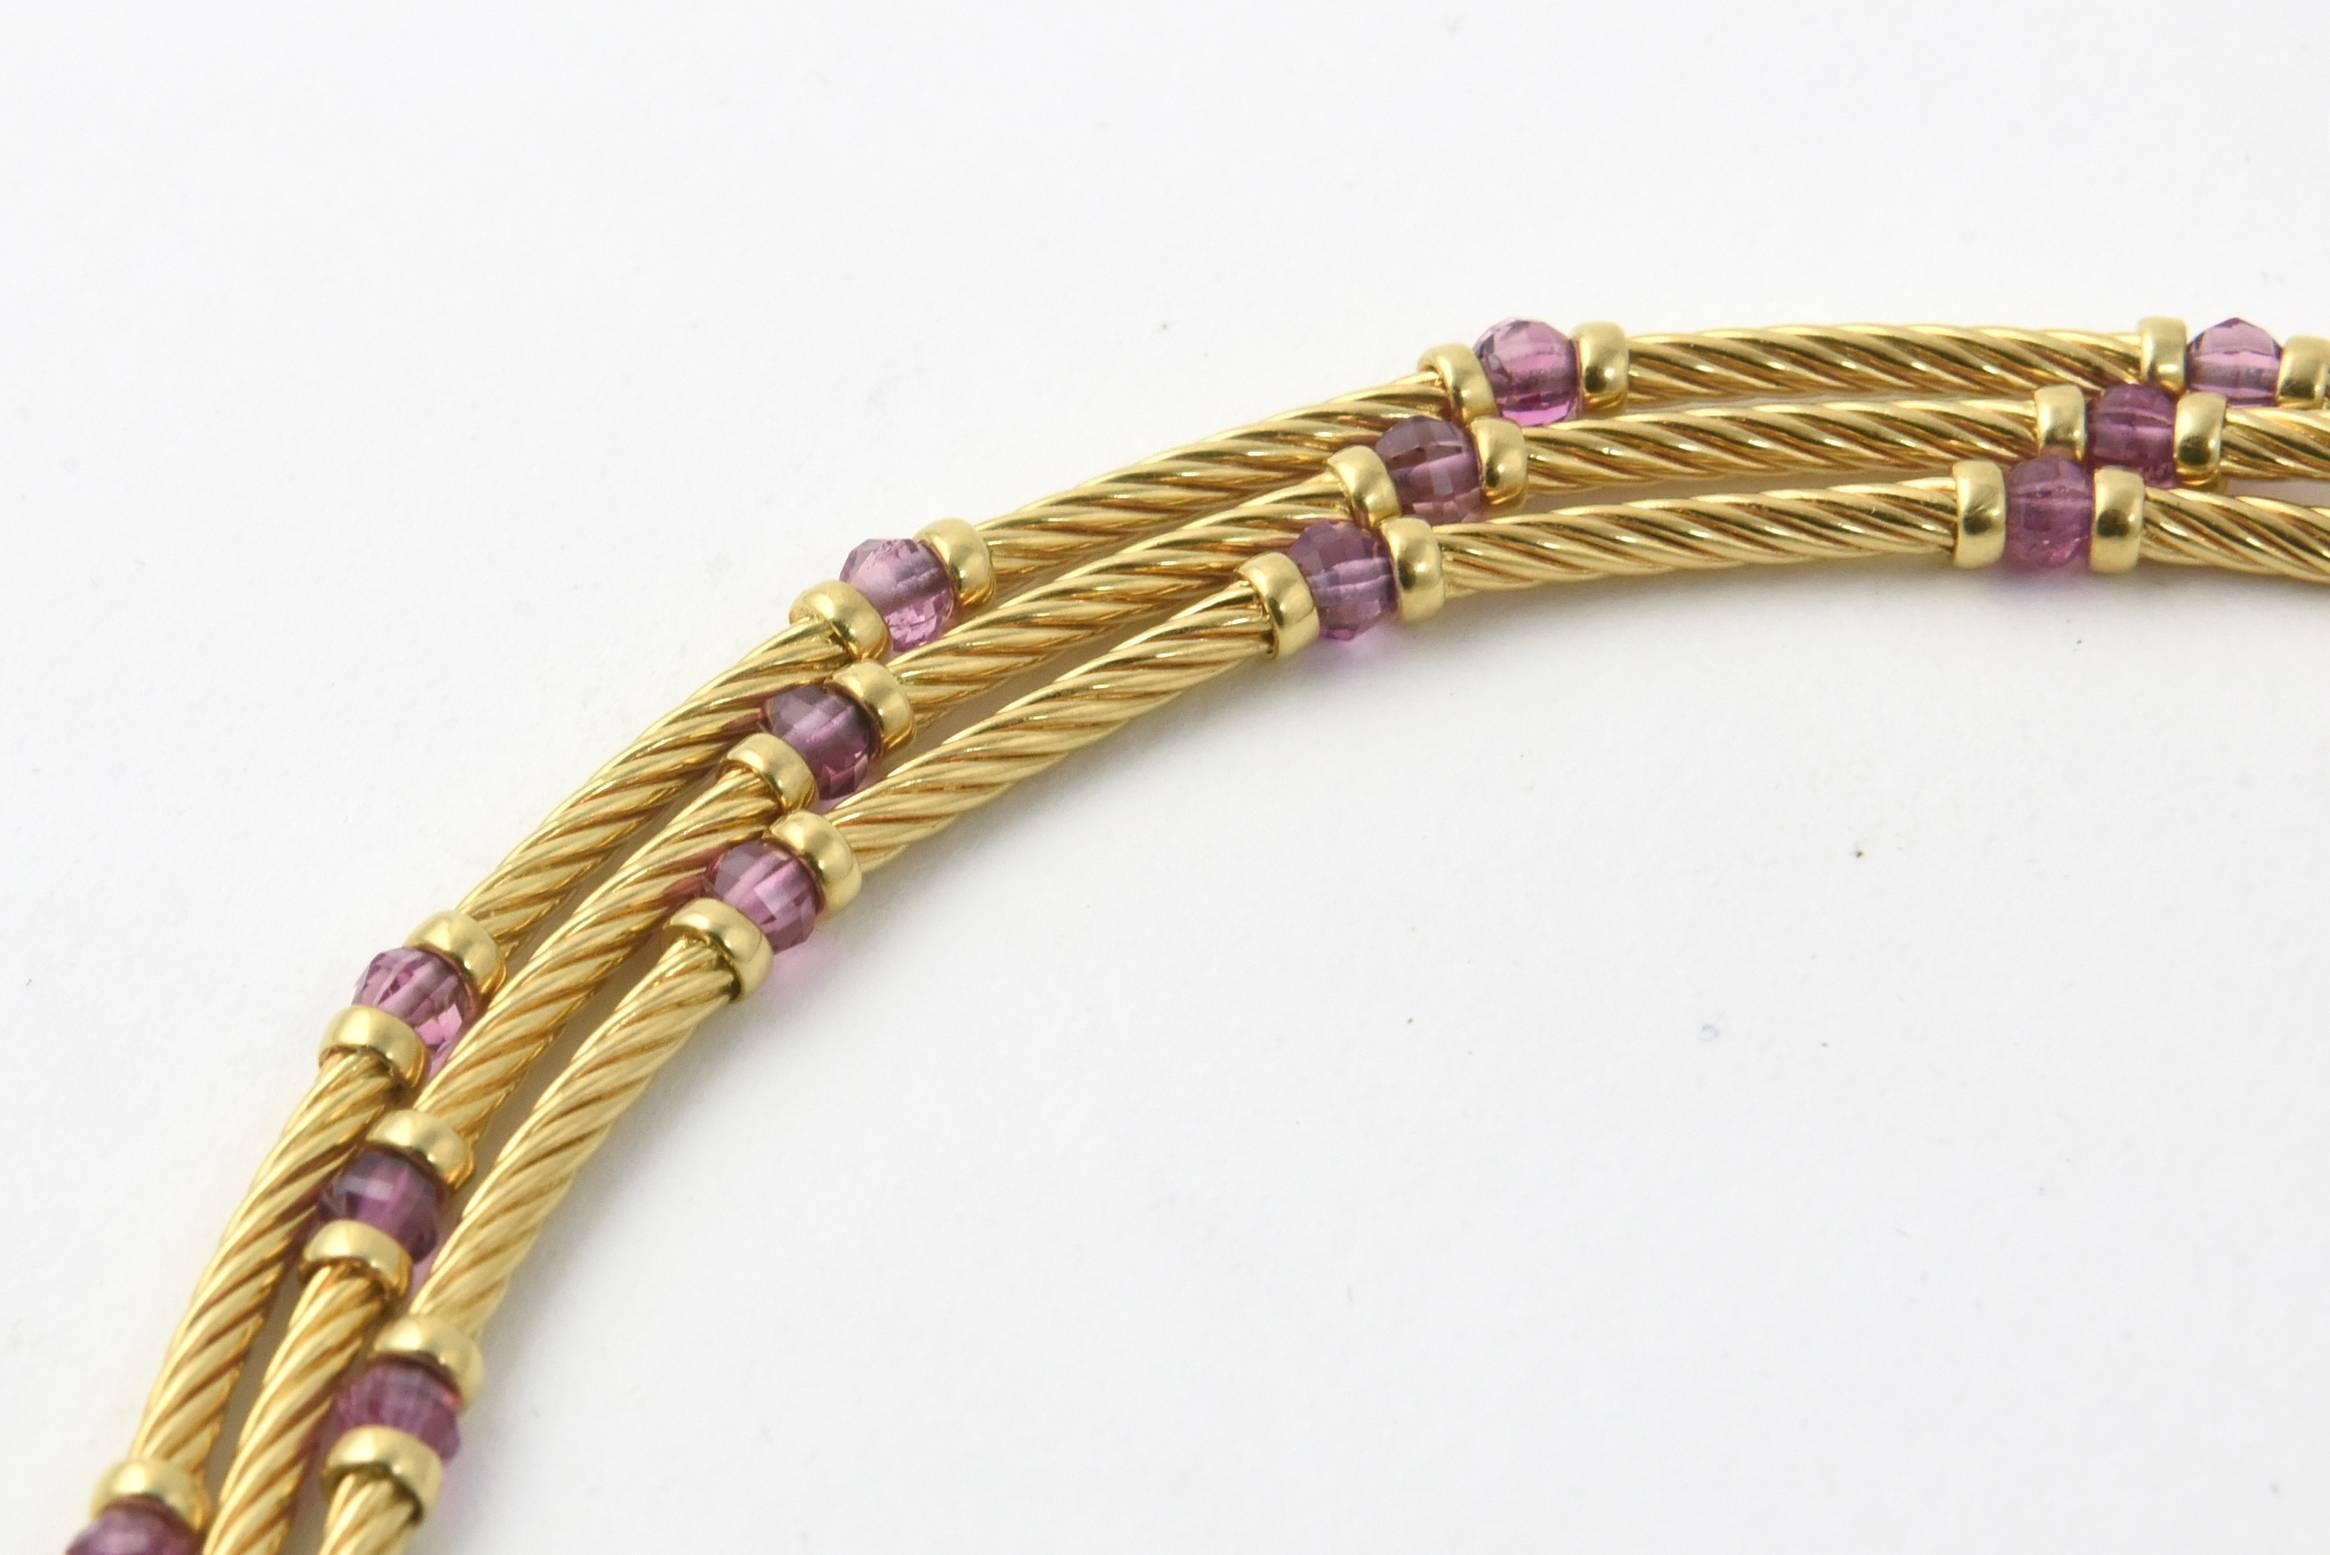 David Yurman 18K yellow gold choker necklace composed of three strands of twisted cable wire adorned with vibrant amethyst beads set between each section. Total weight: 72.6 grams. Marked: 750 DY. Age wear.